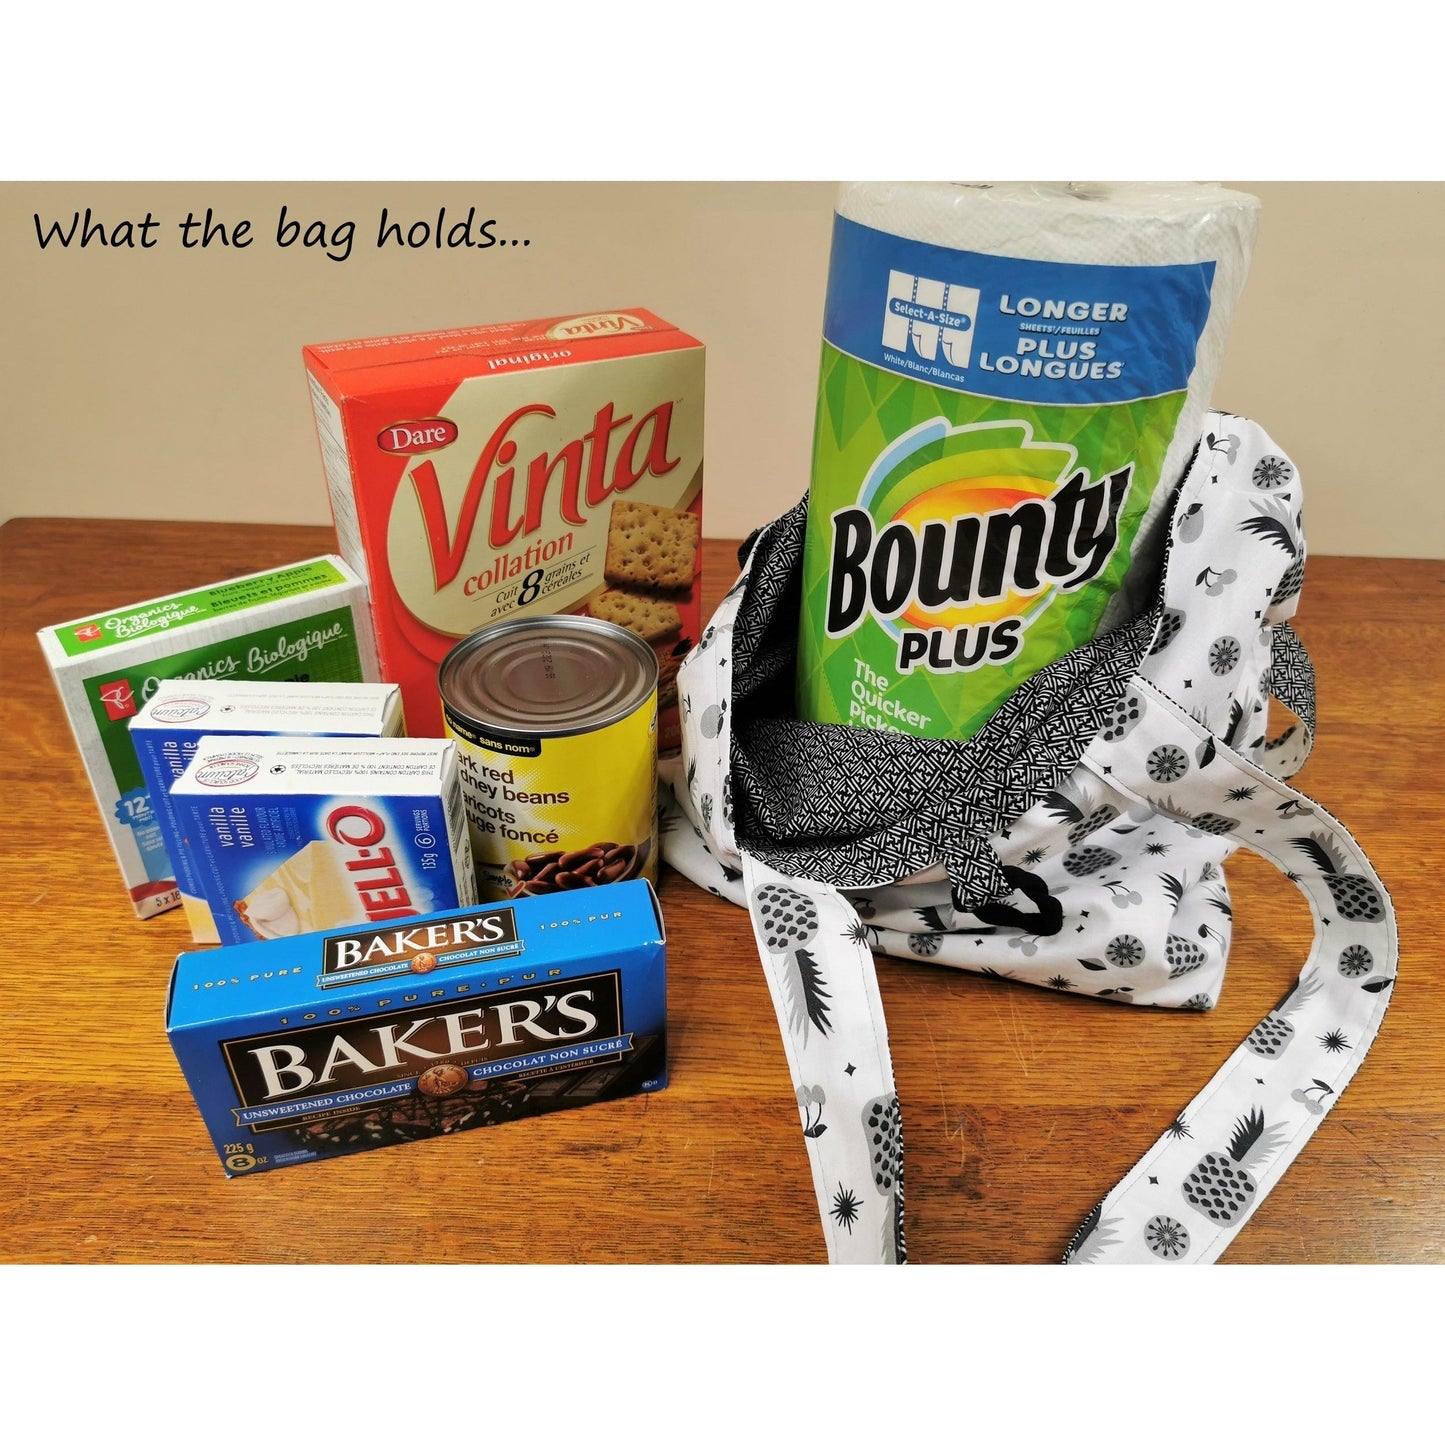 Image shows that the bag holds the following grocery items: Large roll Bounty paper towels, box Vinta crackers, can of kidney beans, two boxes of Jello pudding mix, small box fruit snack bars, box of Bakers unsweetened chocolate squares.